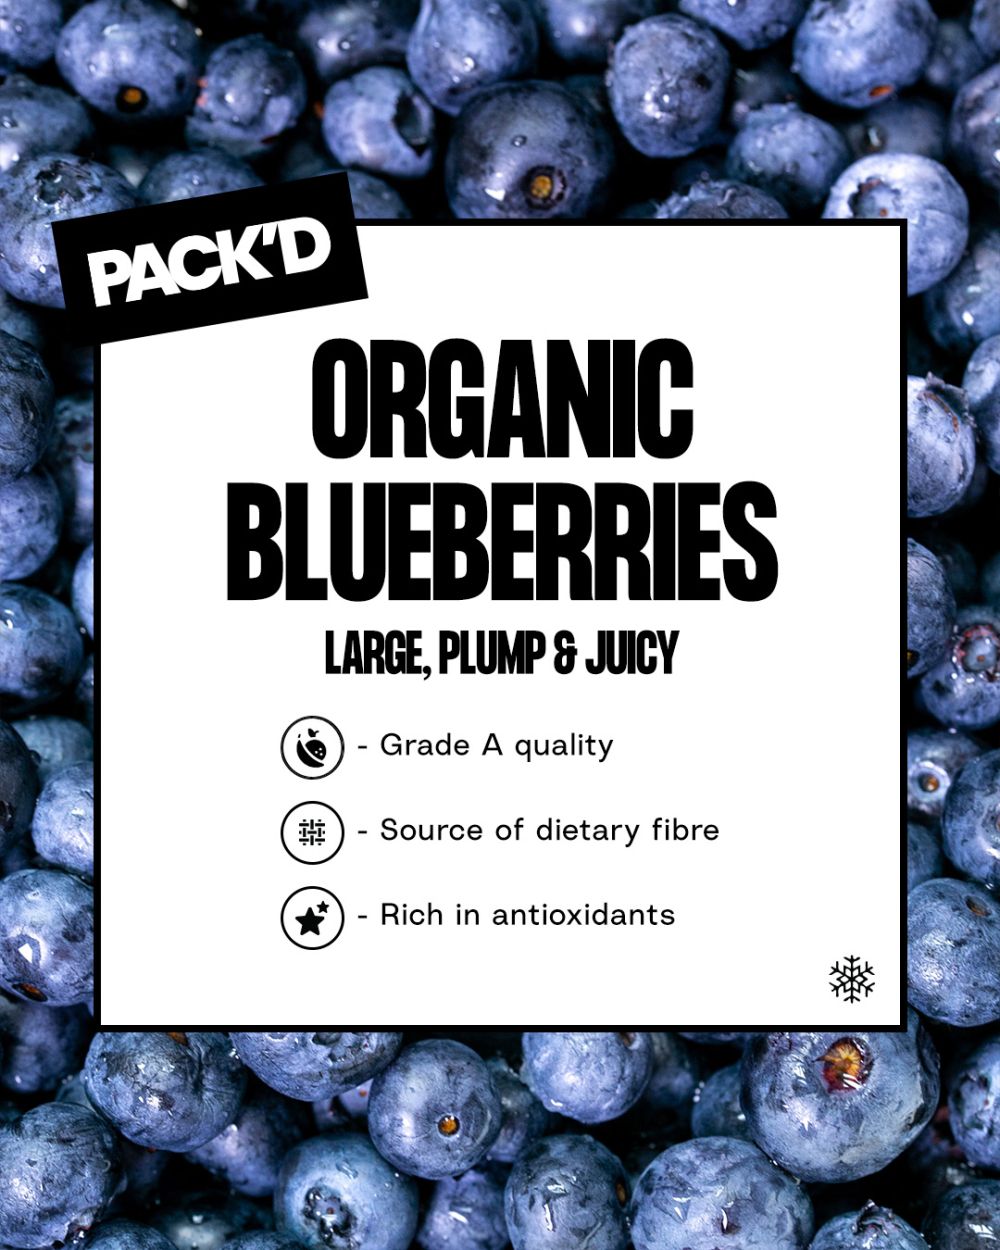 packd_fruits_blueberries.